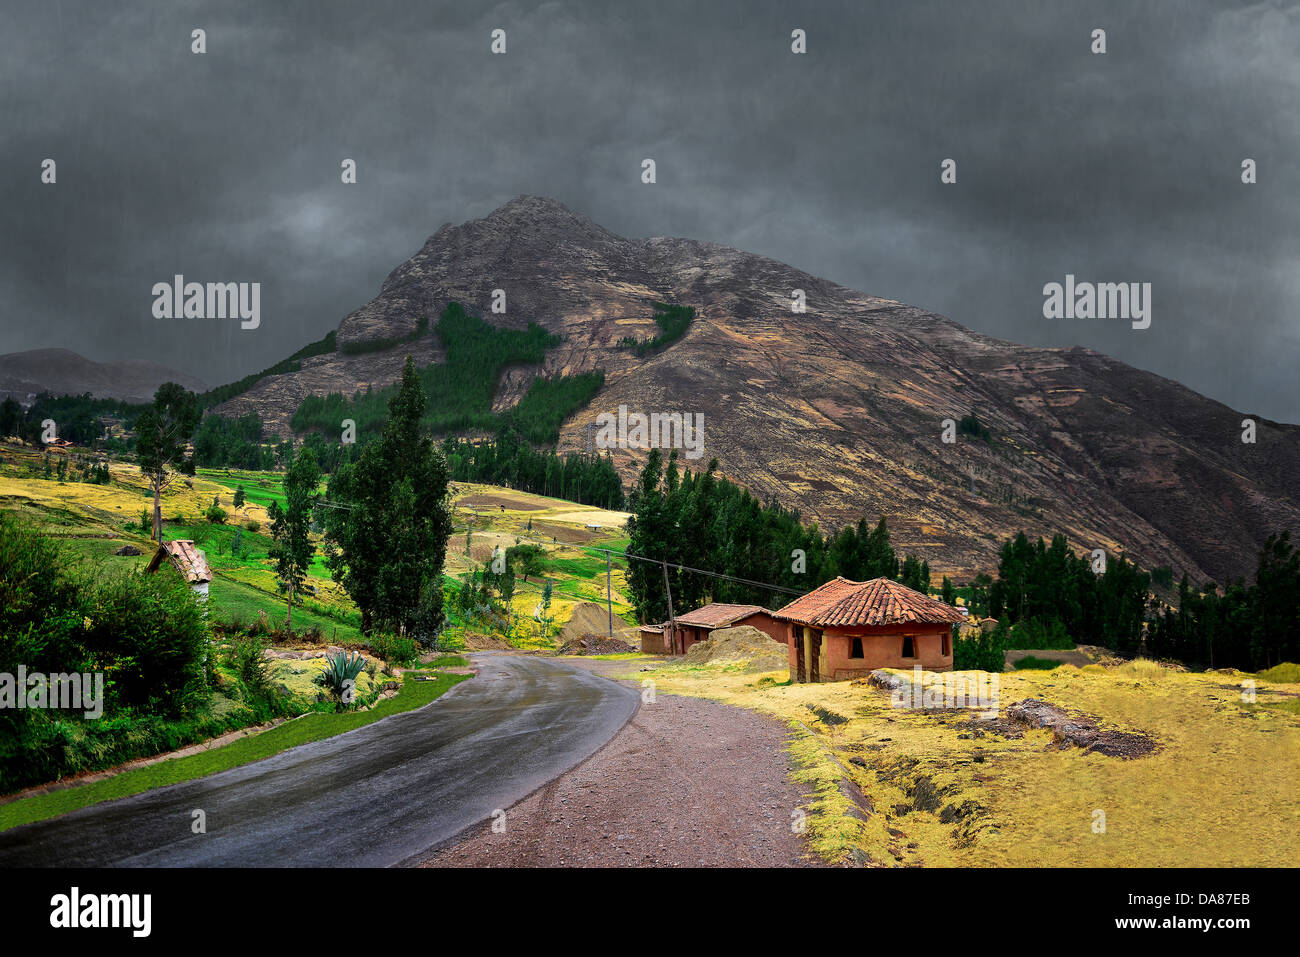 Rain in the mountains of Peru. Dramatic landscape with dark clouds, heavy rain and small peasant houses. Stock Photo